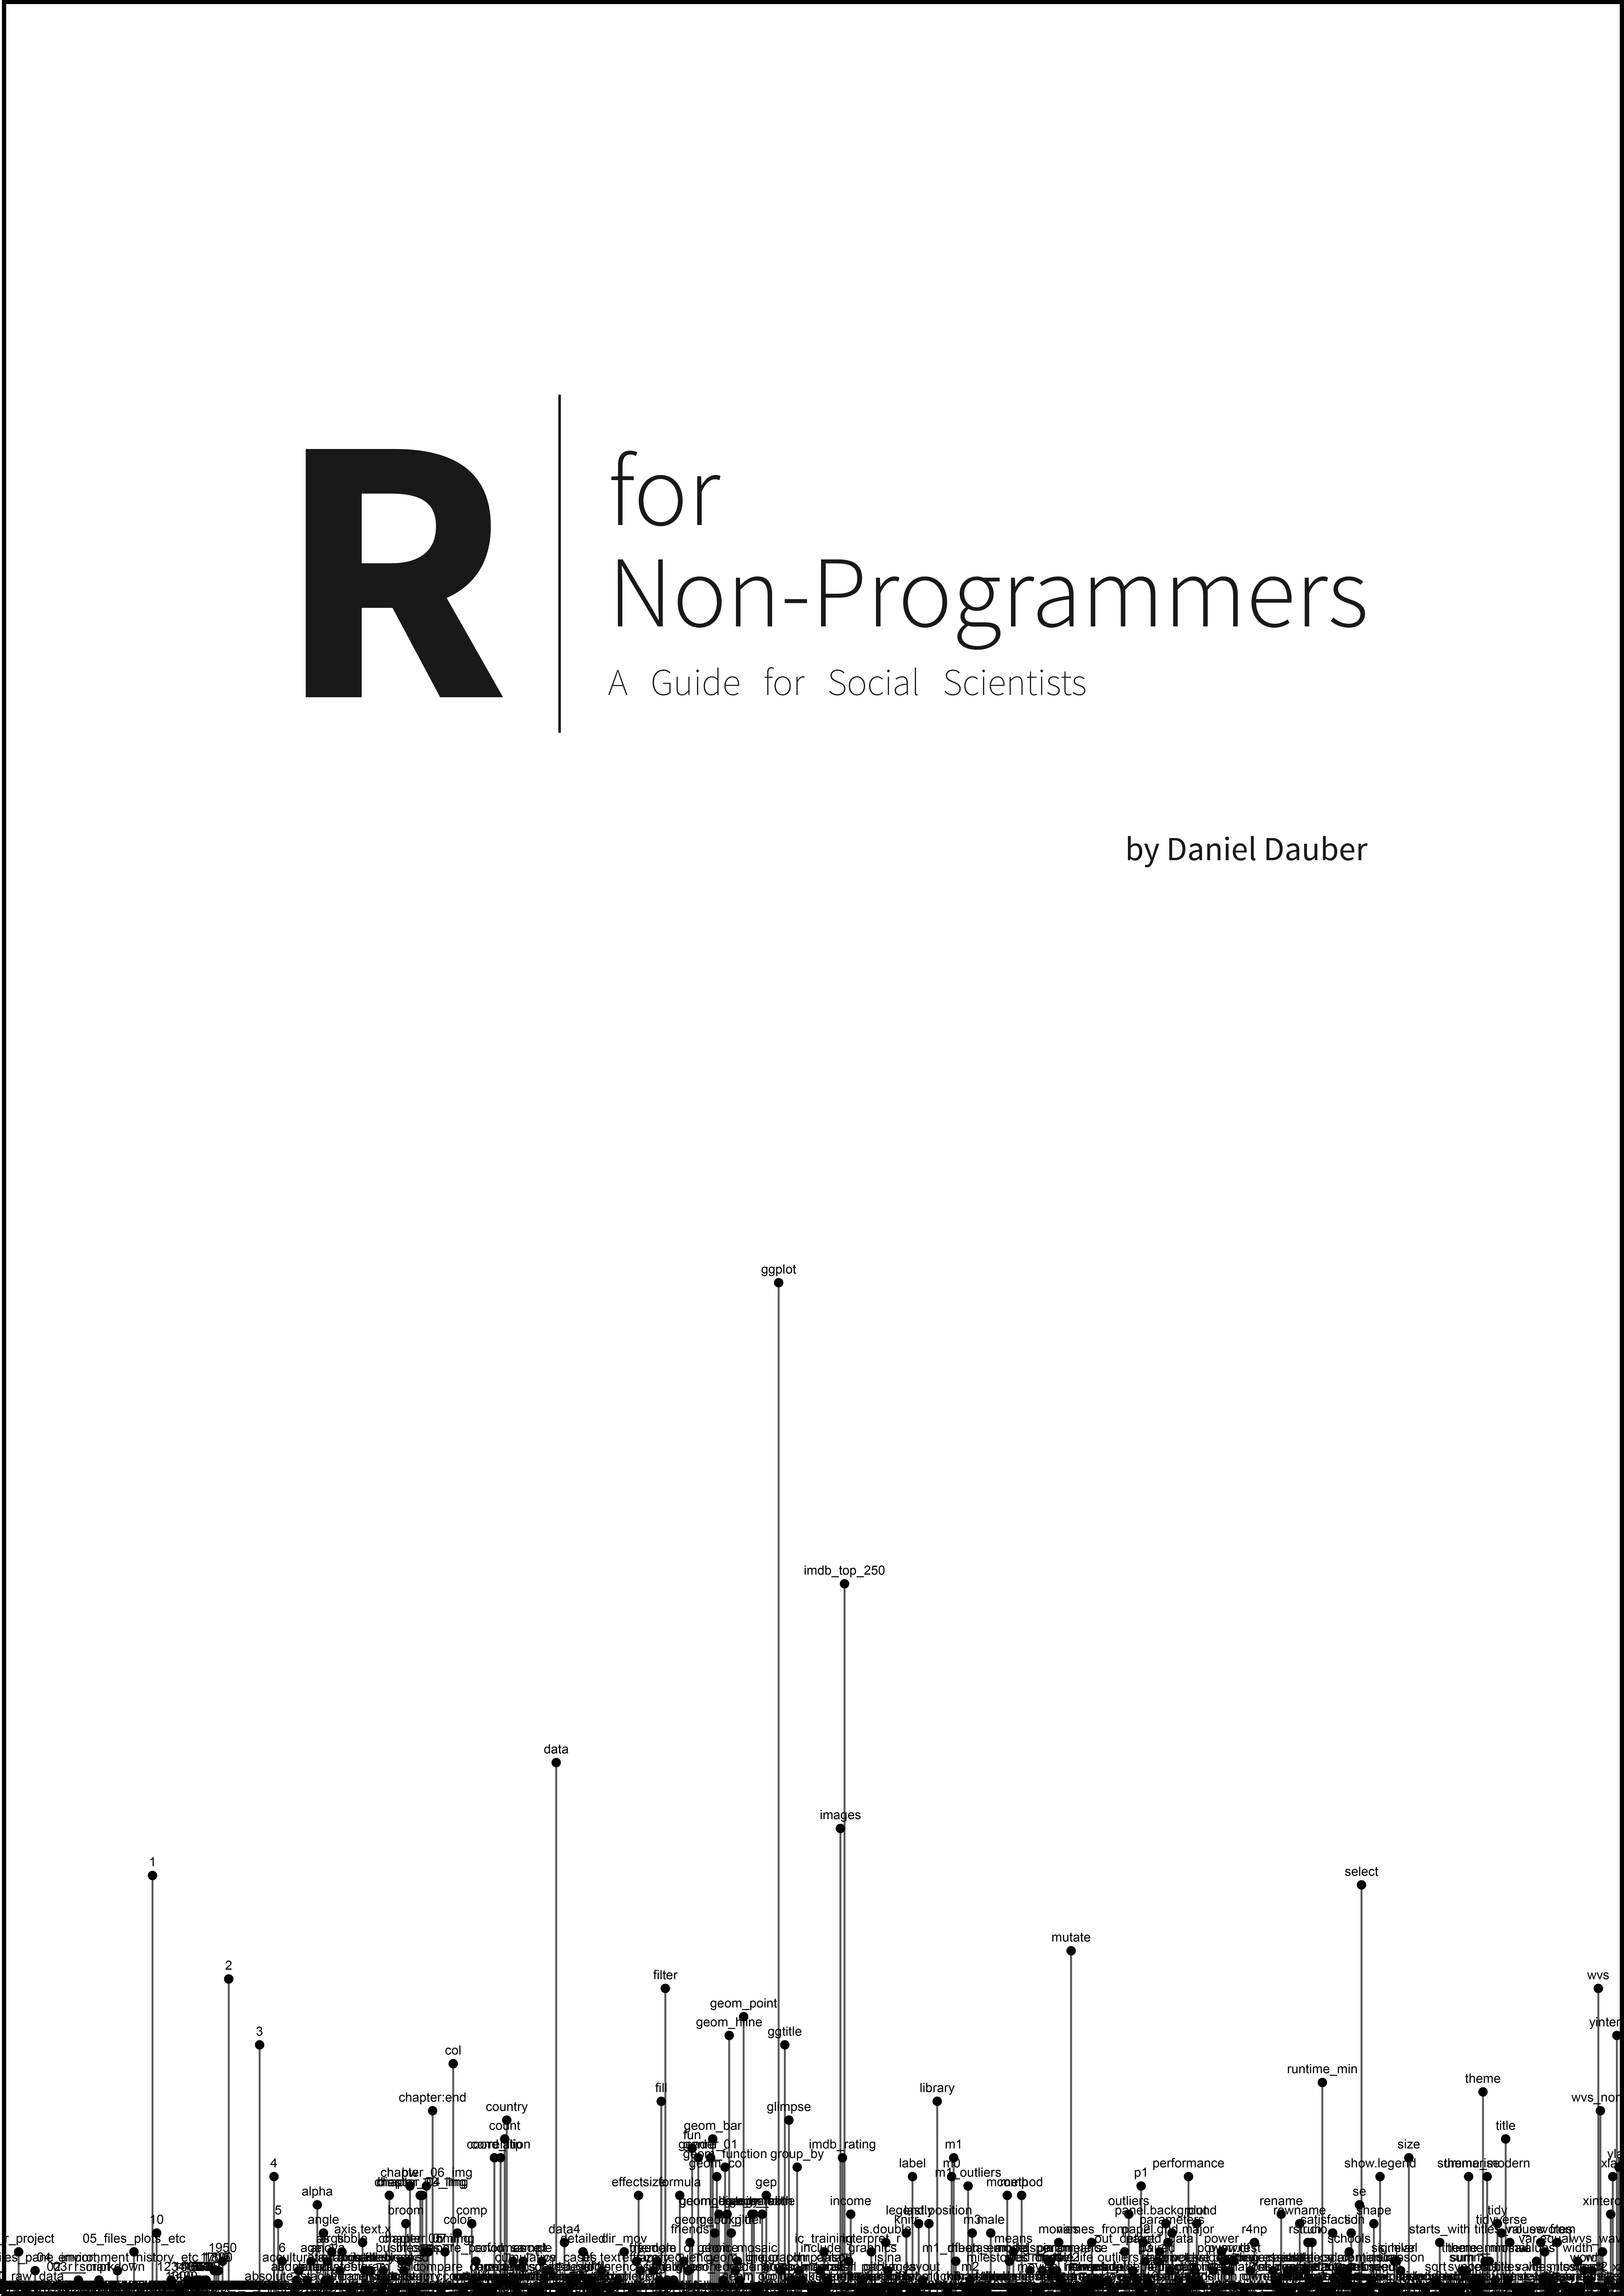 R for Non-Programmers: A Guide for Social Scientists